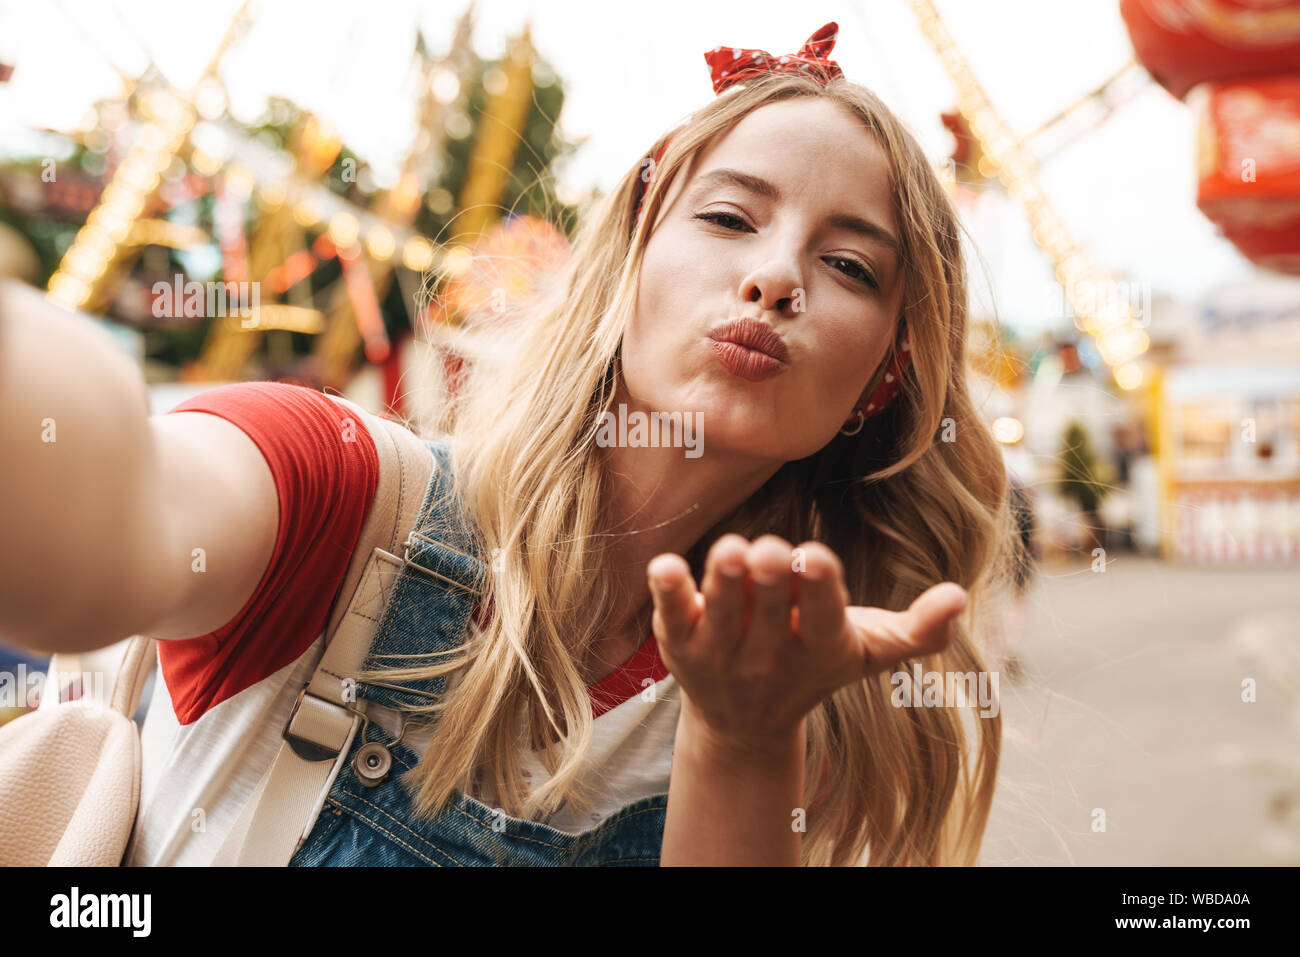 Image Of Pretty Blonde Woman Wearing Girlish Clothes Blowing Air